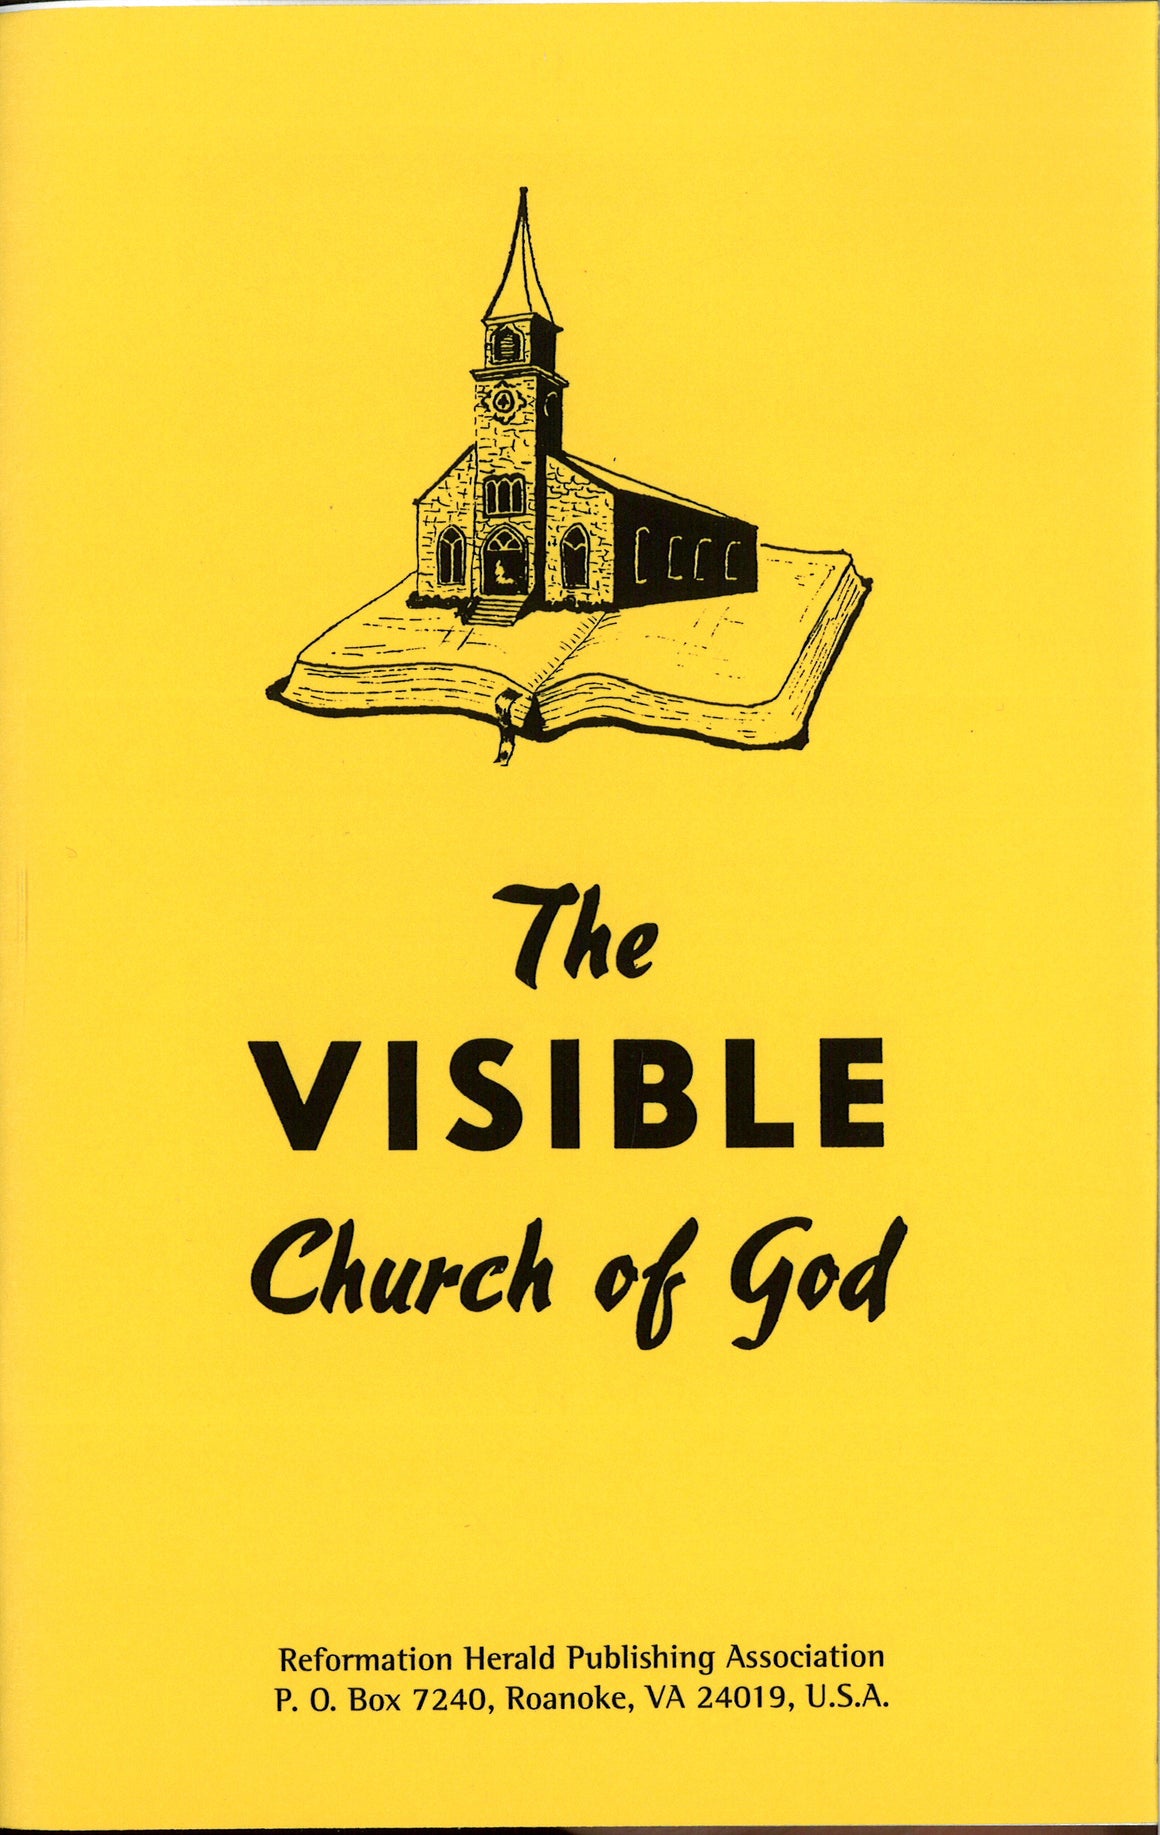 The Visible Church of God